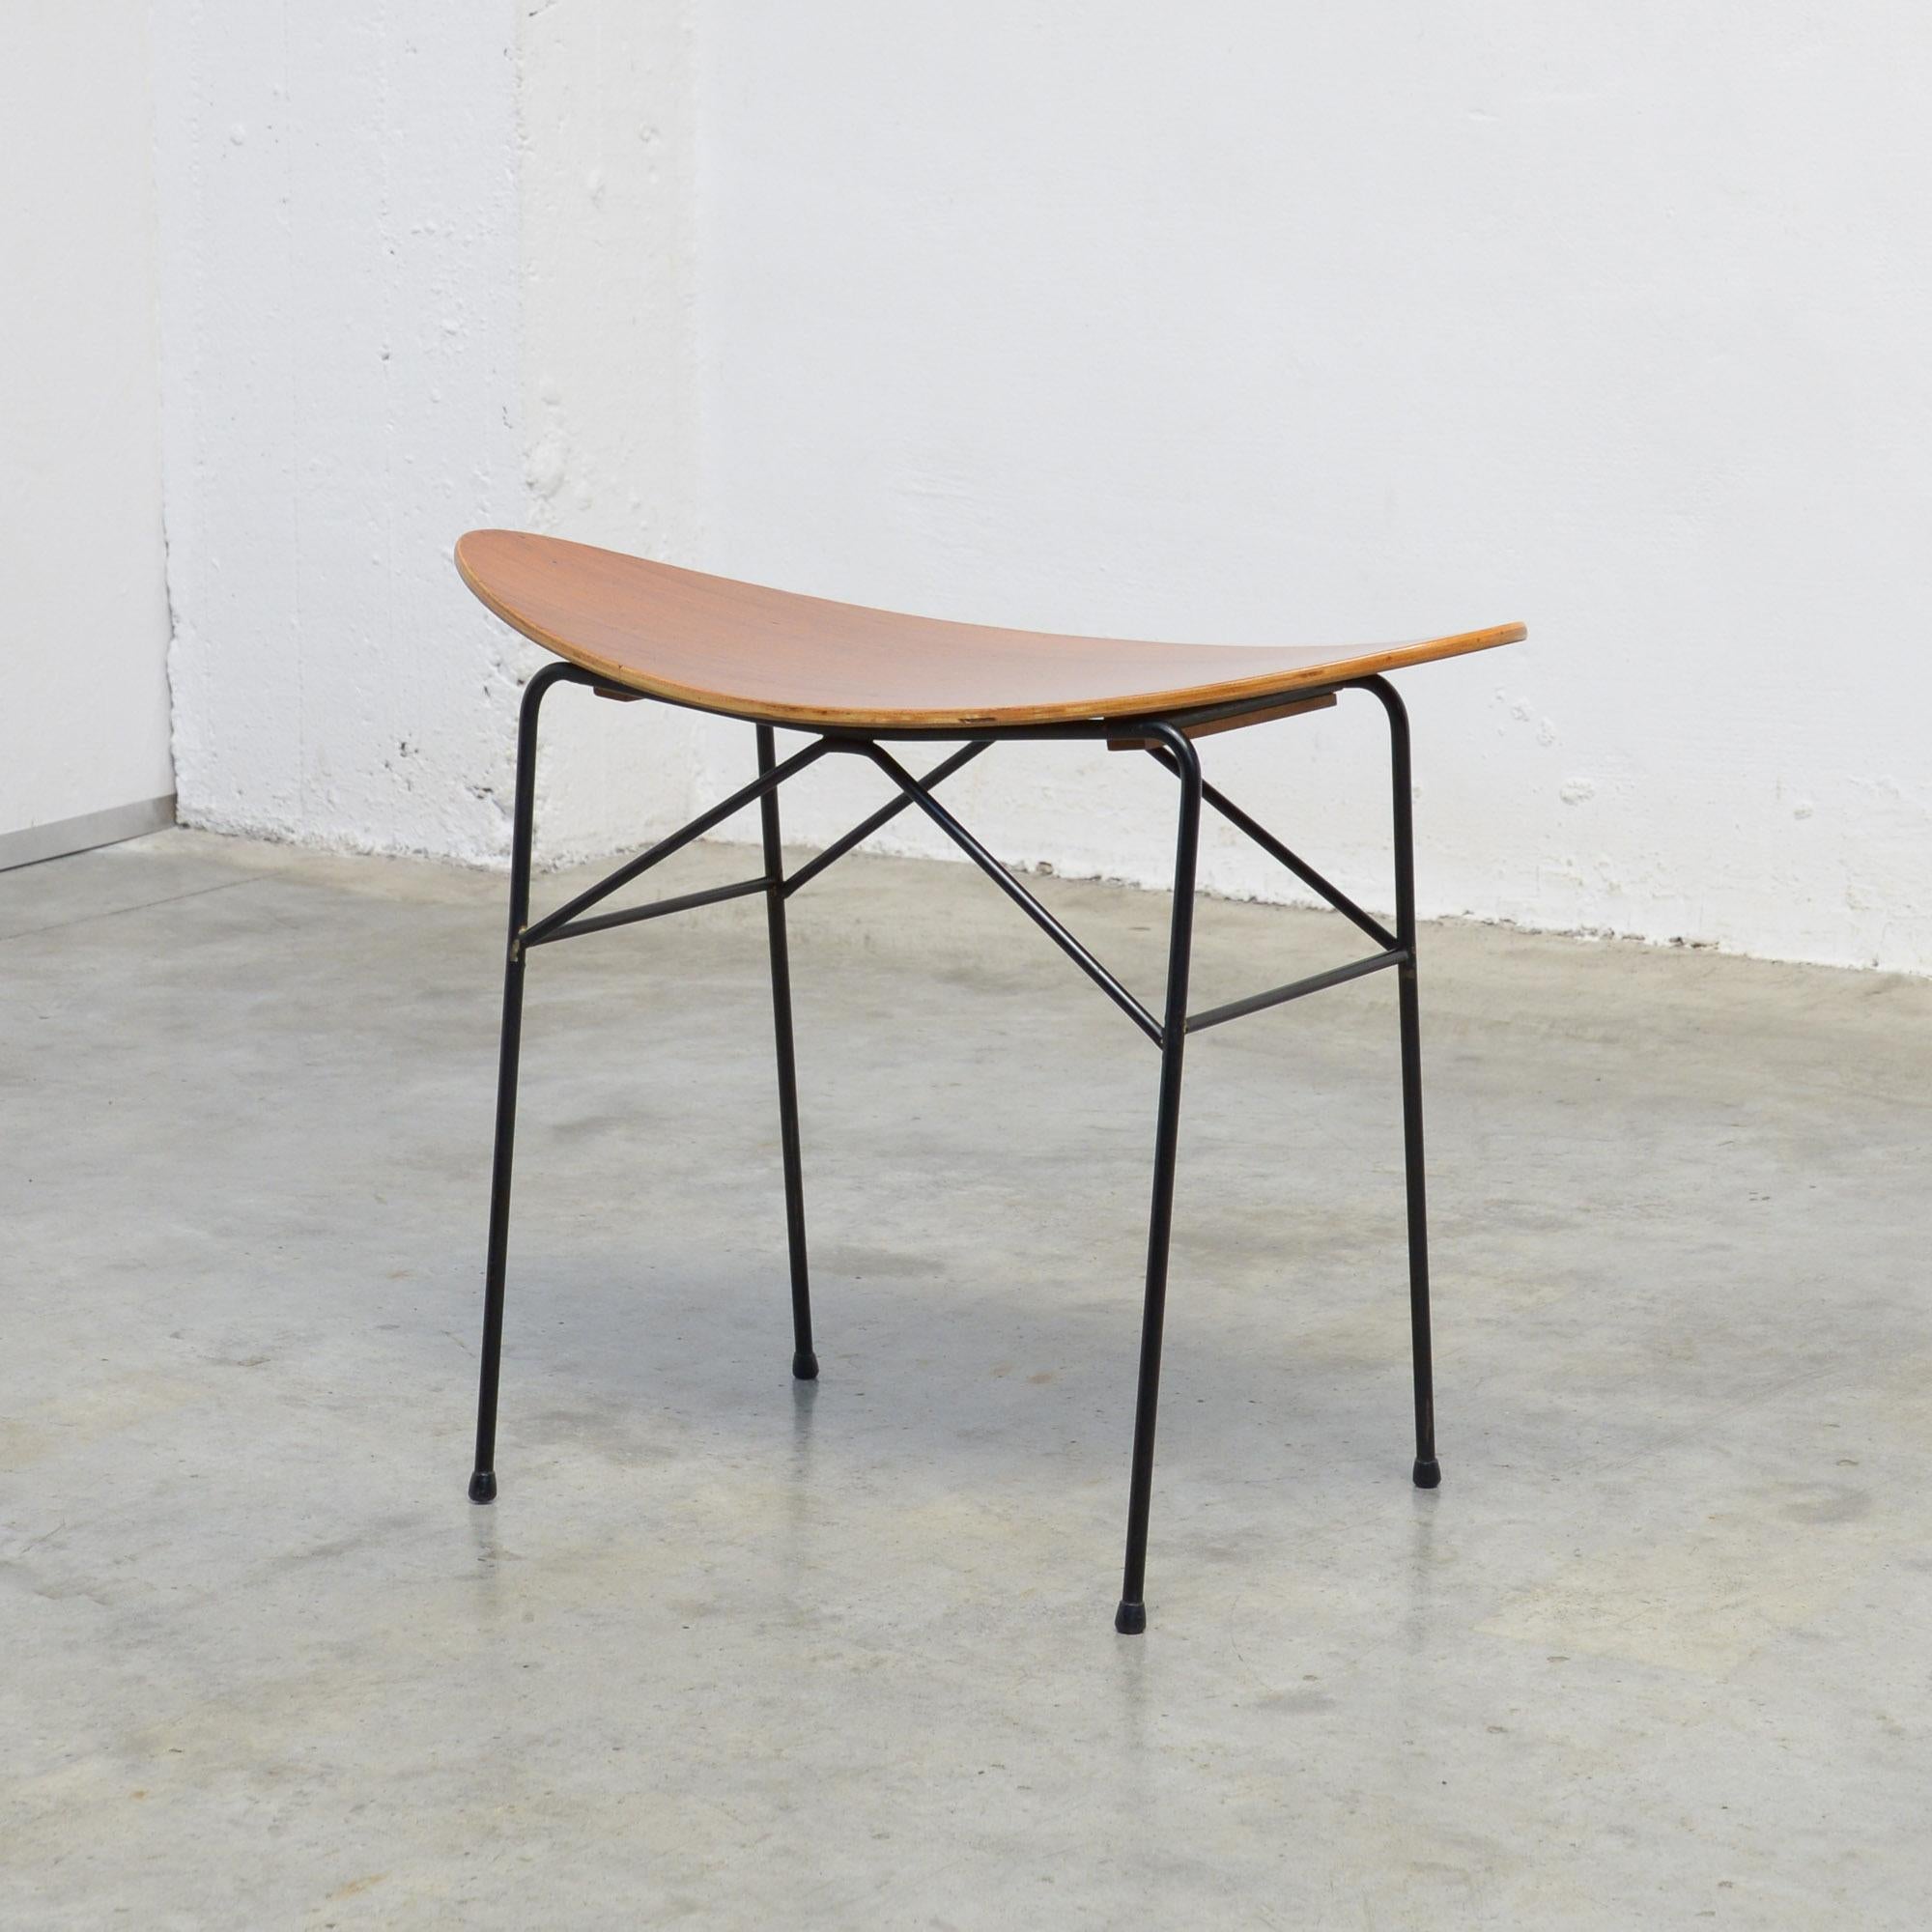 This elegant stool was manufactured by the Swedish furniture company Ulferts Tibro. It can be dated in the 1950s.
The black lacquered iron base holds the molded teak plywood seat.
This rare stool is in very good condition.